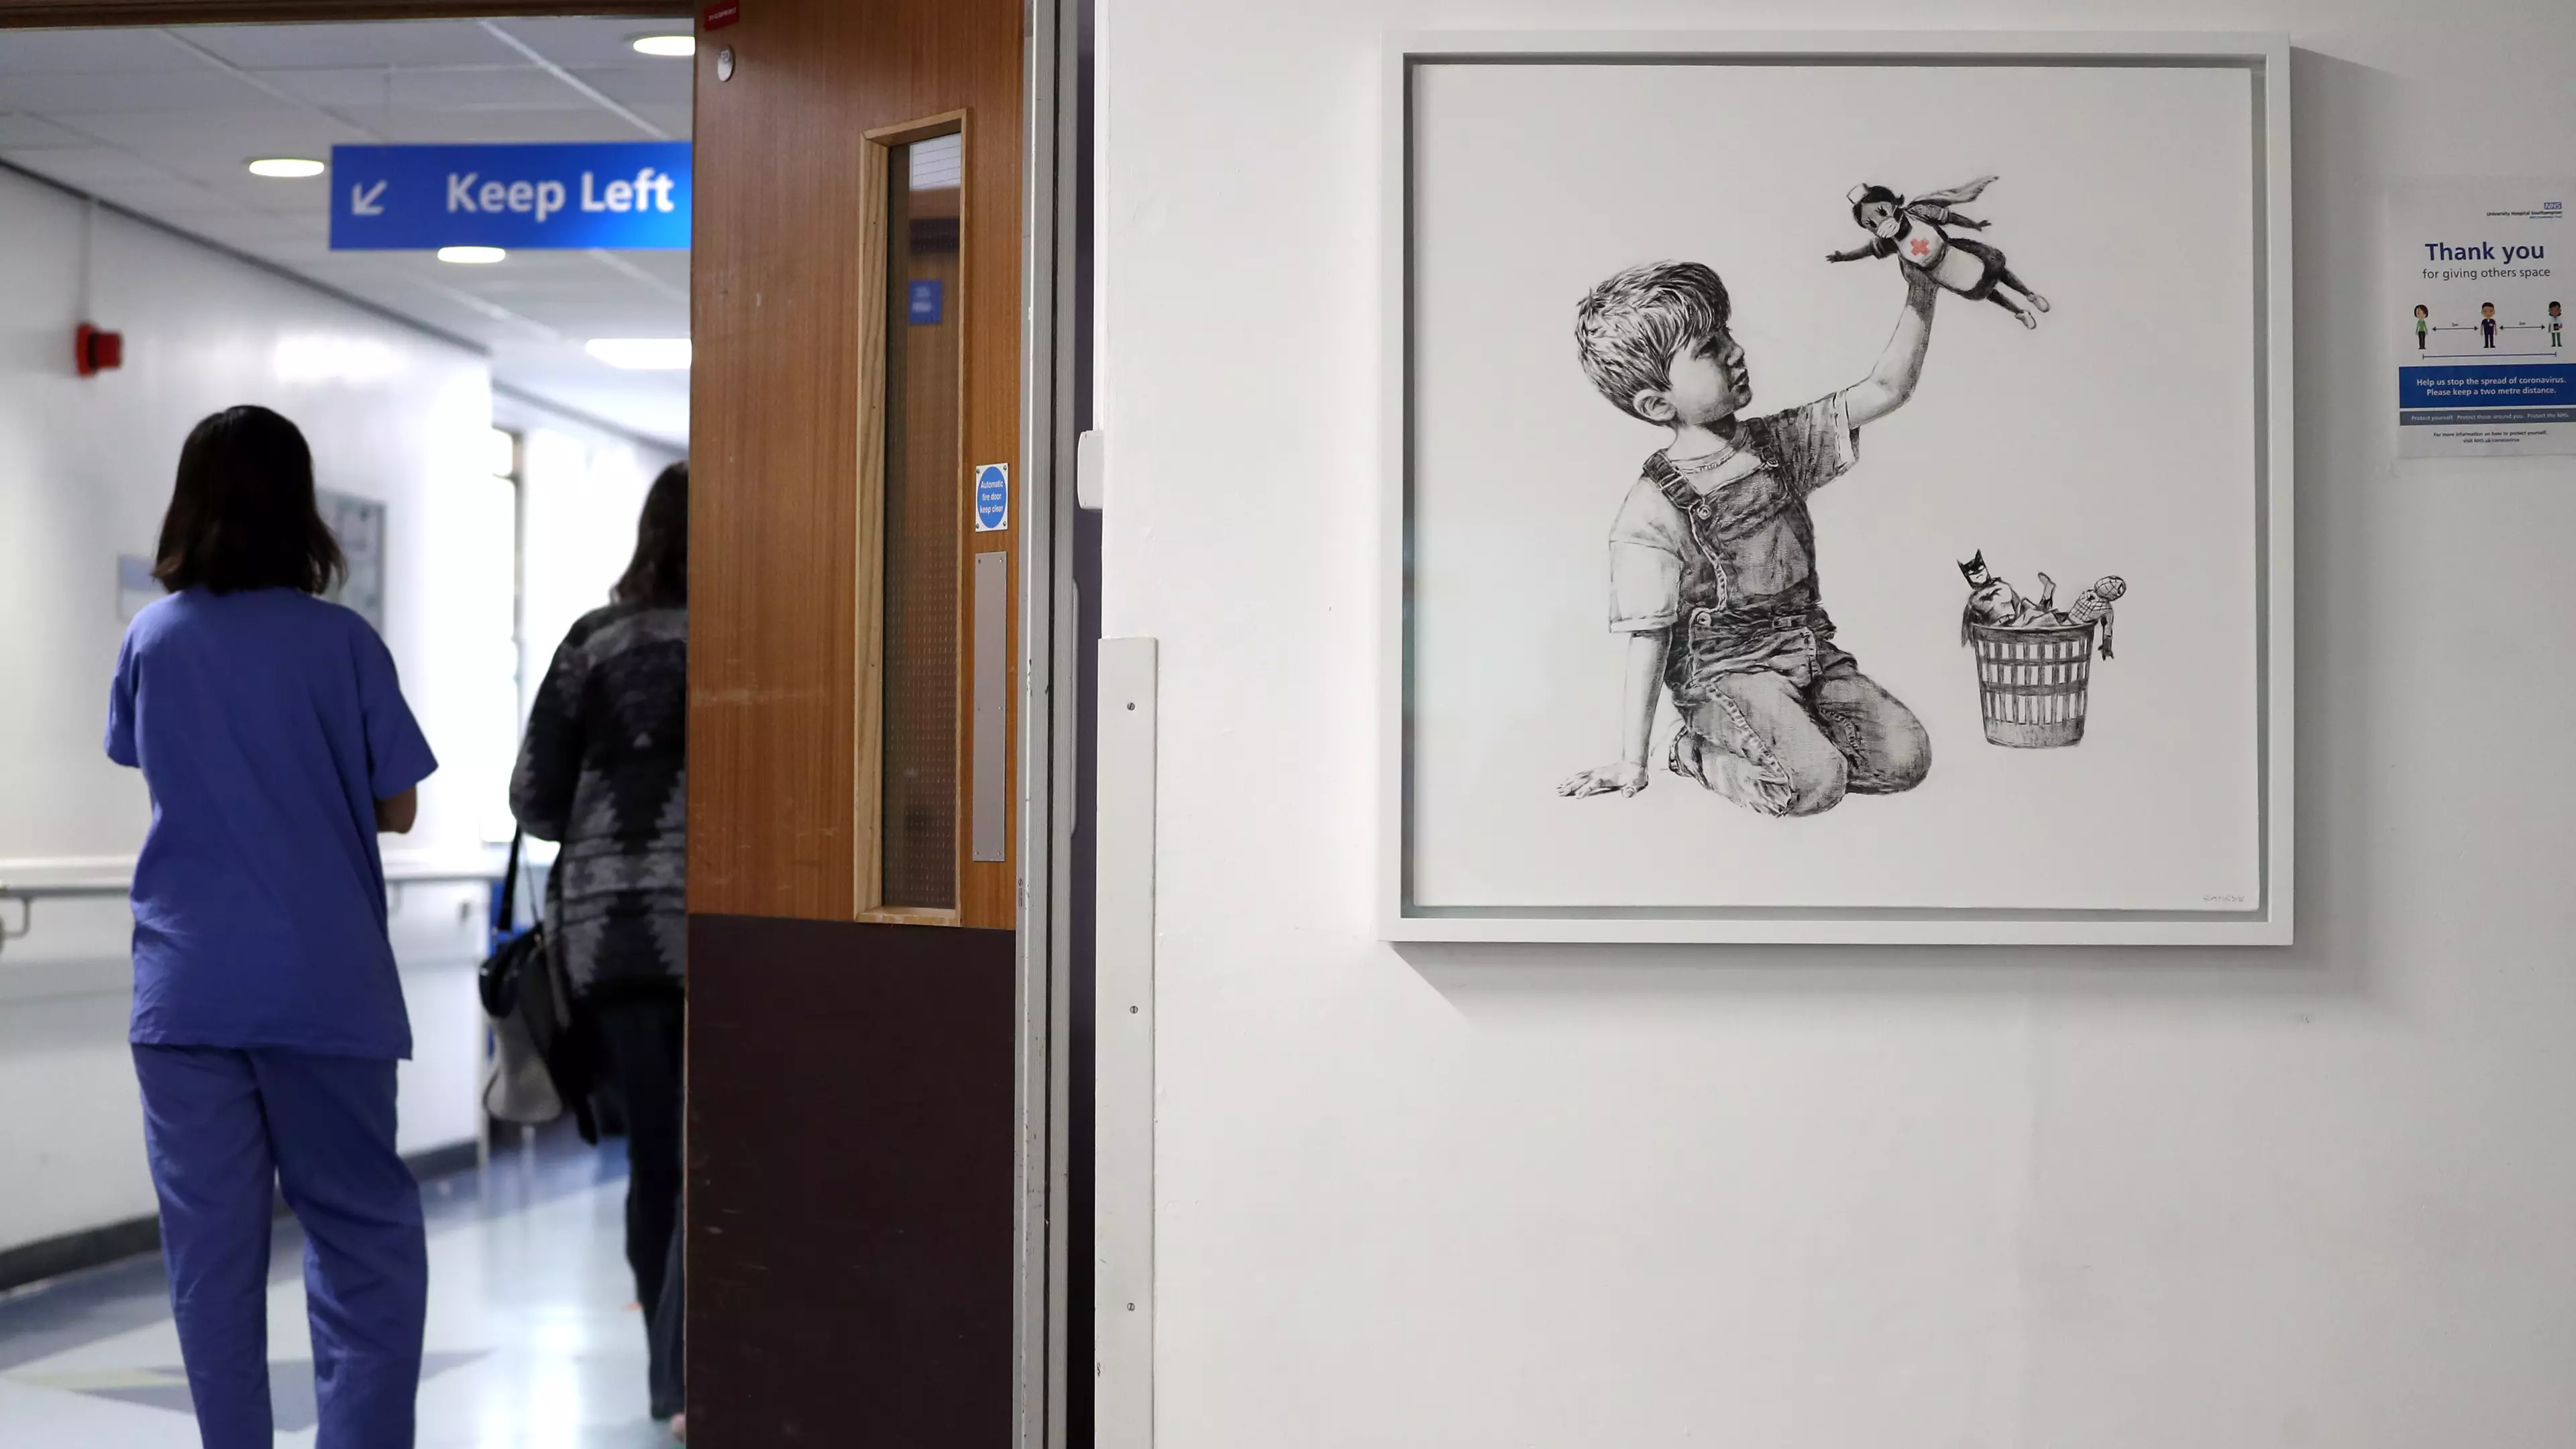 Man In Hazmat Suit Carrying Cordless Drill Caught Trying To Steal Banksy Piece From Hospital